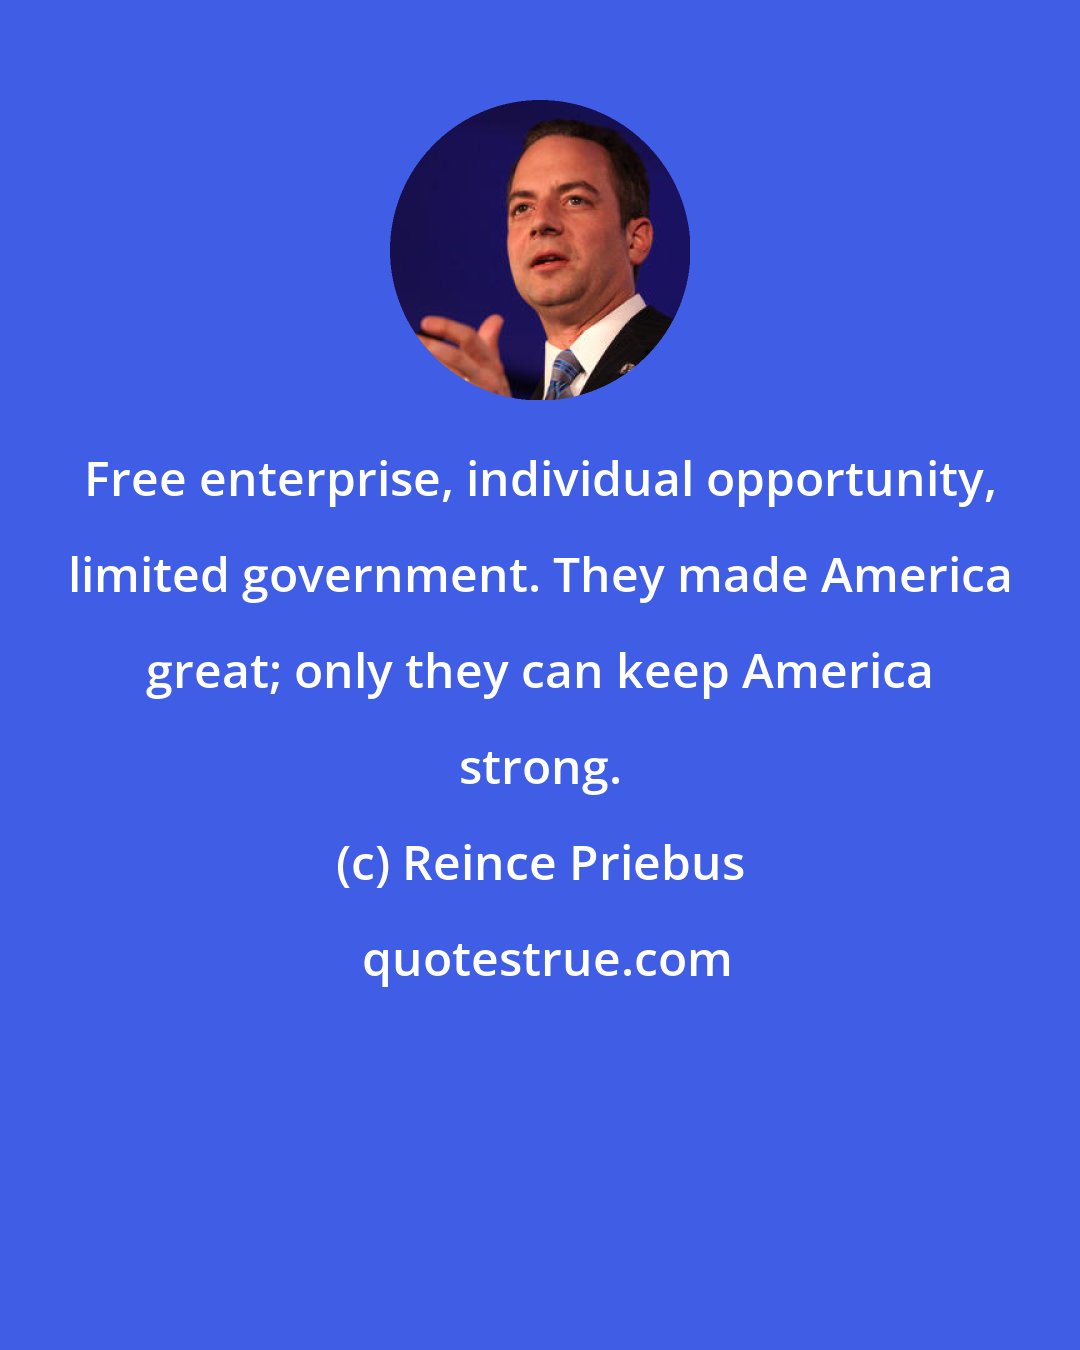 Reince Priebus: Free enterprise, individual opportunity, limited government. They made America great; only they can keep America strong.